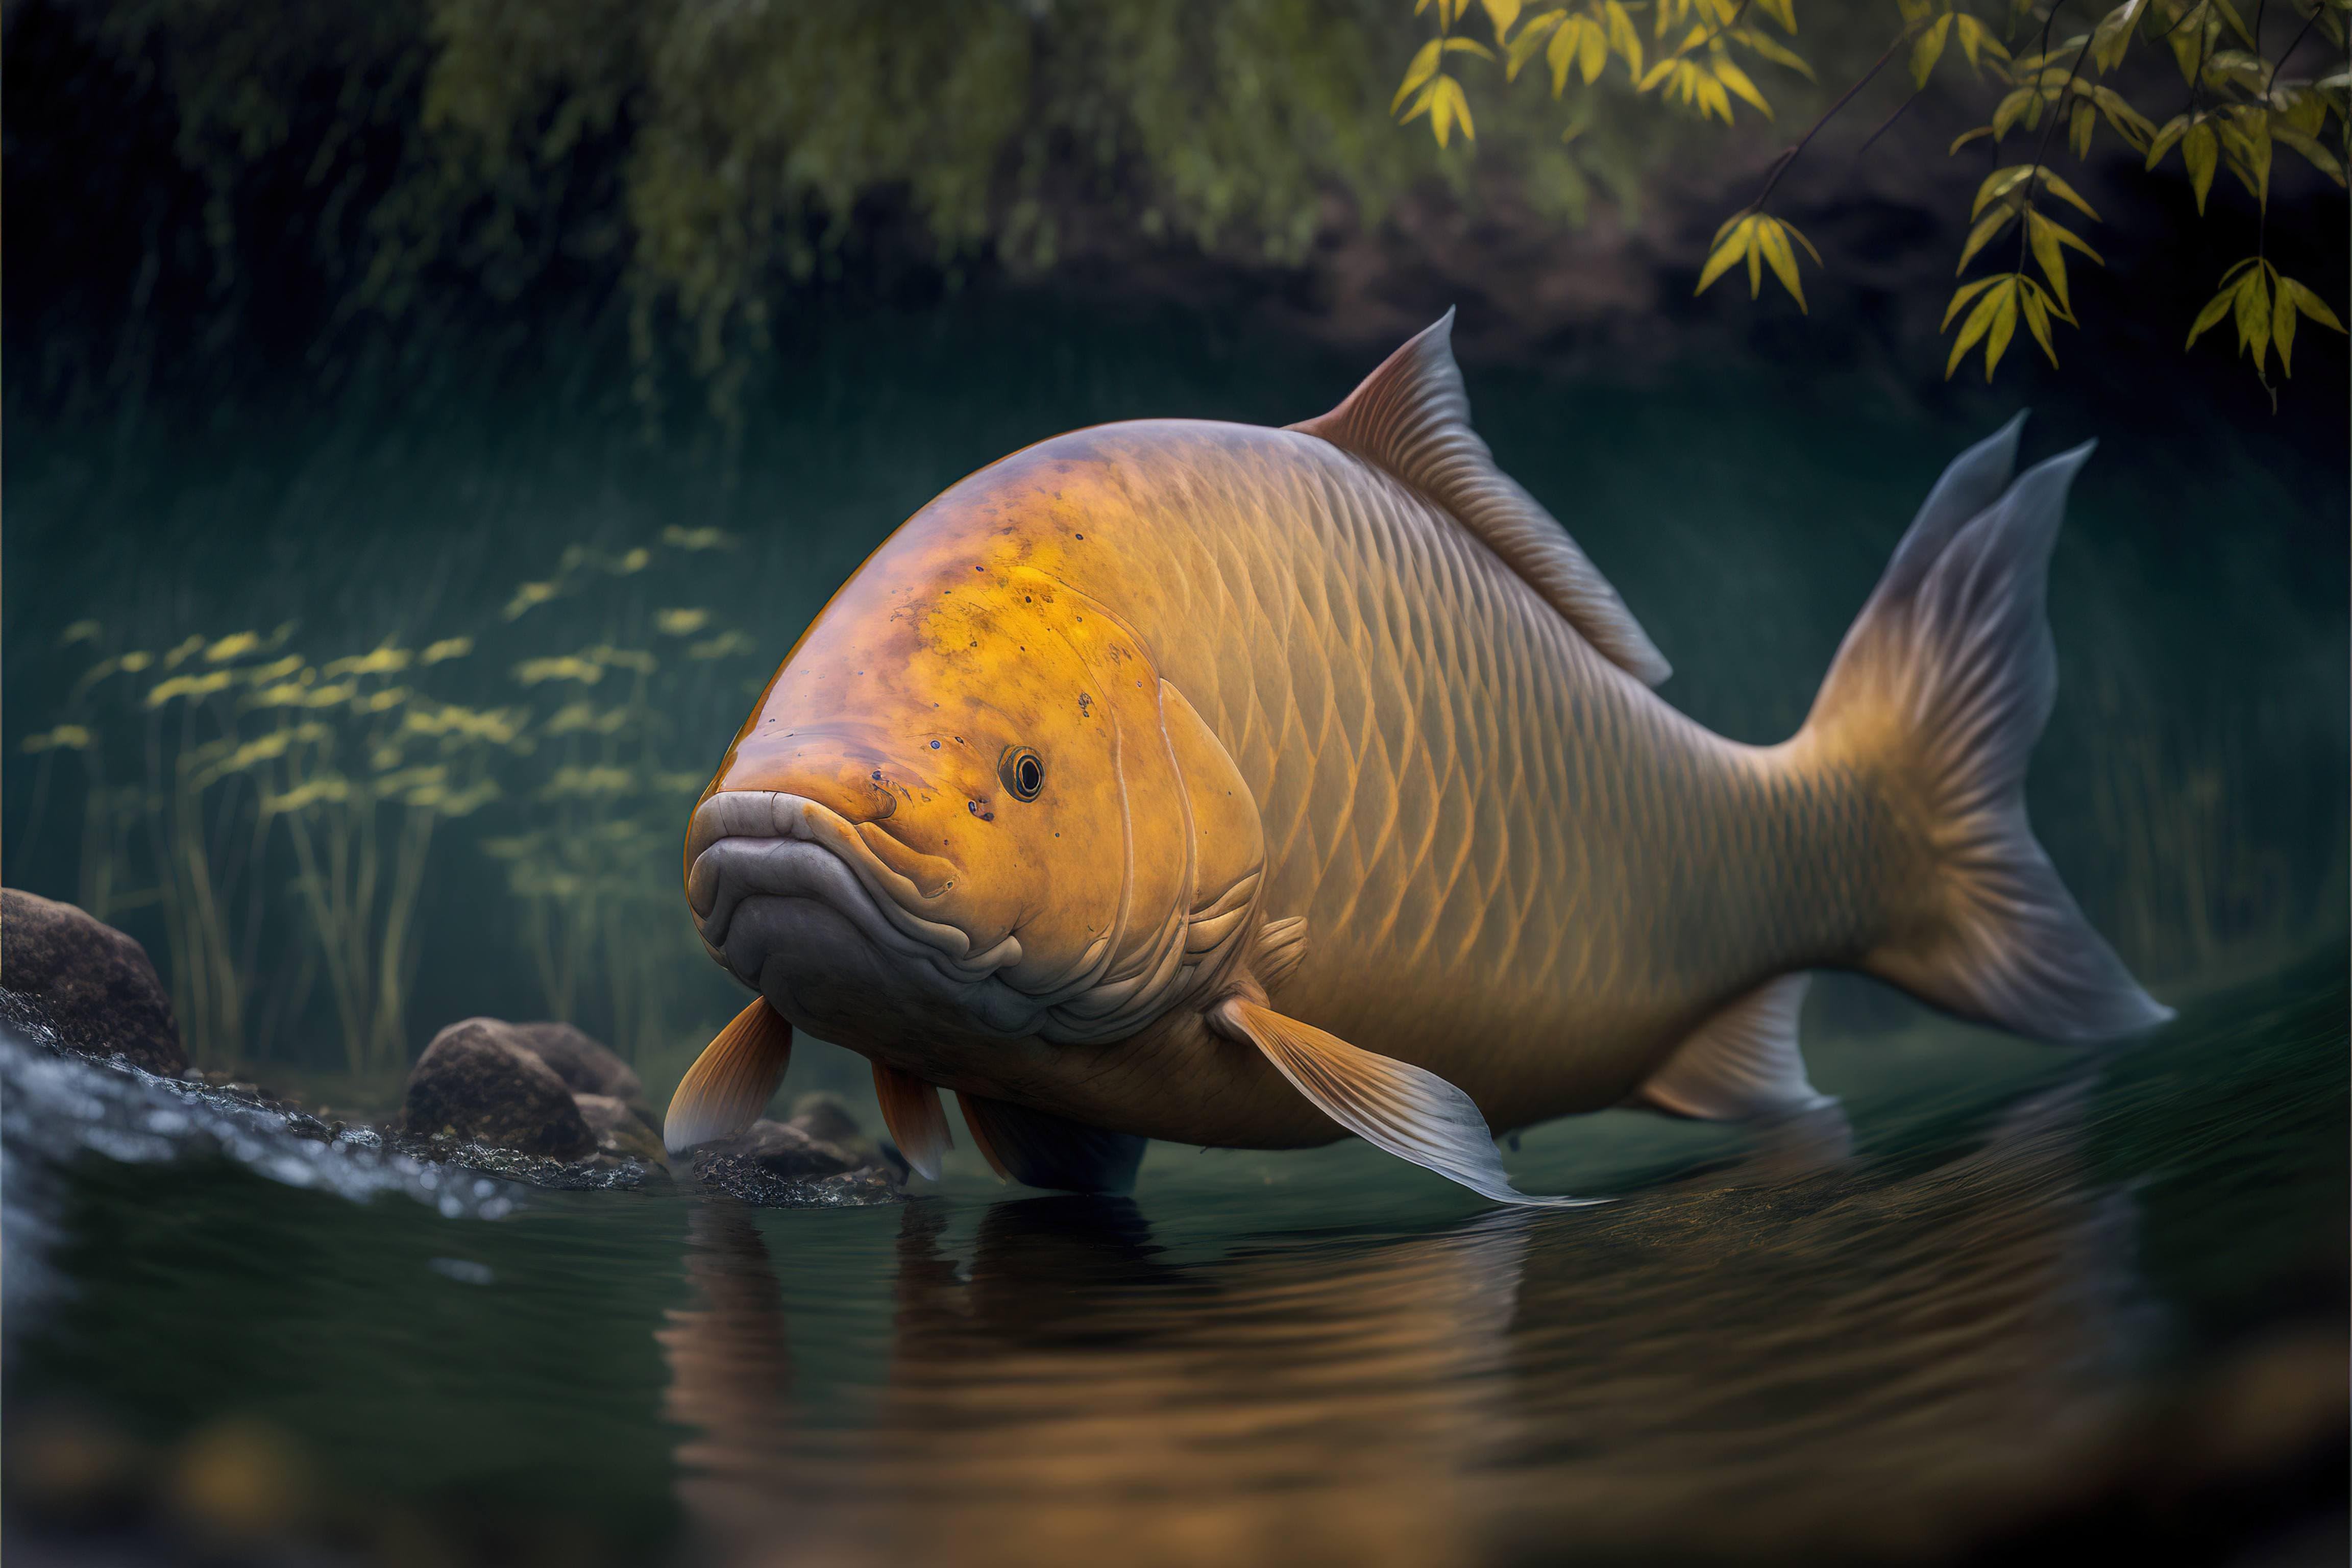 A carp fish floating above the water